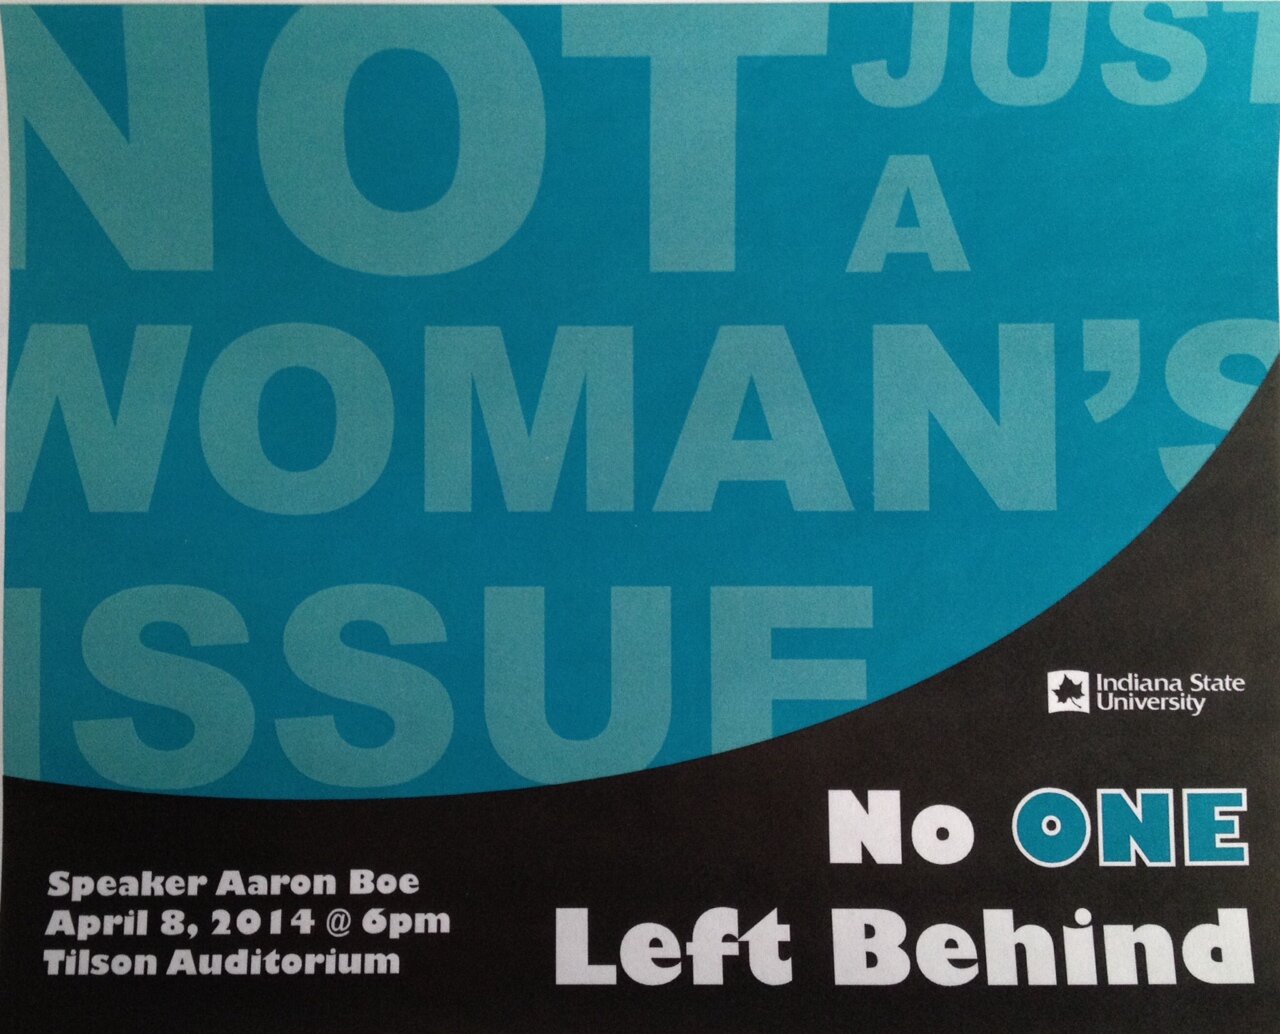 No One Left Behind is raising awareness about sexual assault at Indiana State University! The event takes place April 8 at 6 pm in Tilson Auditorium!